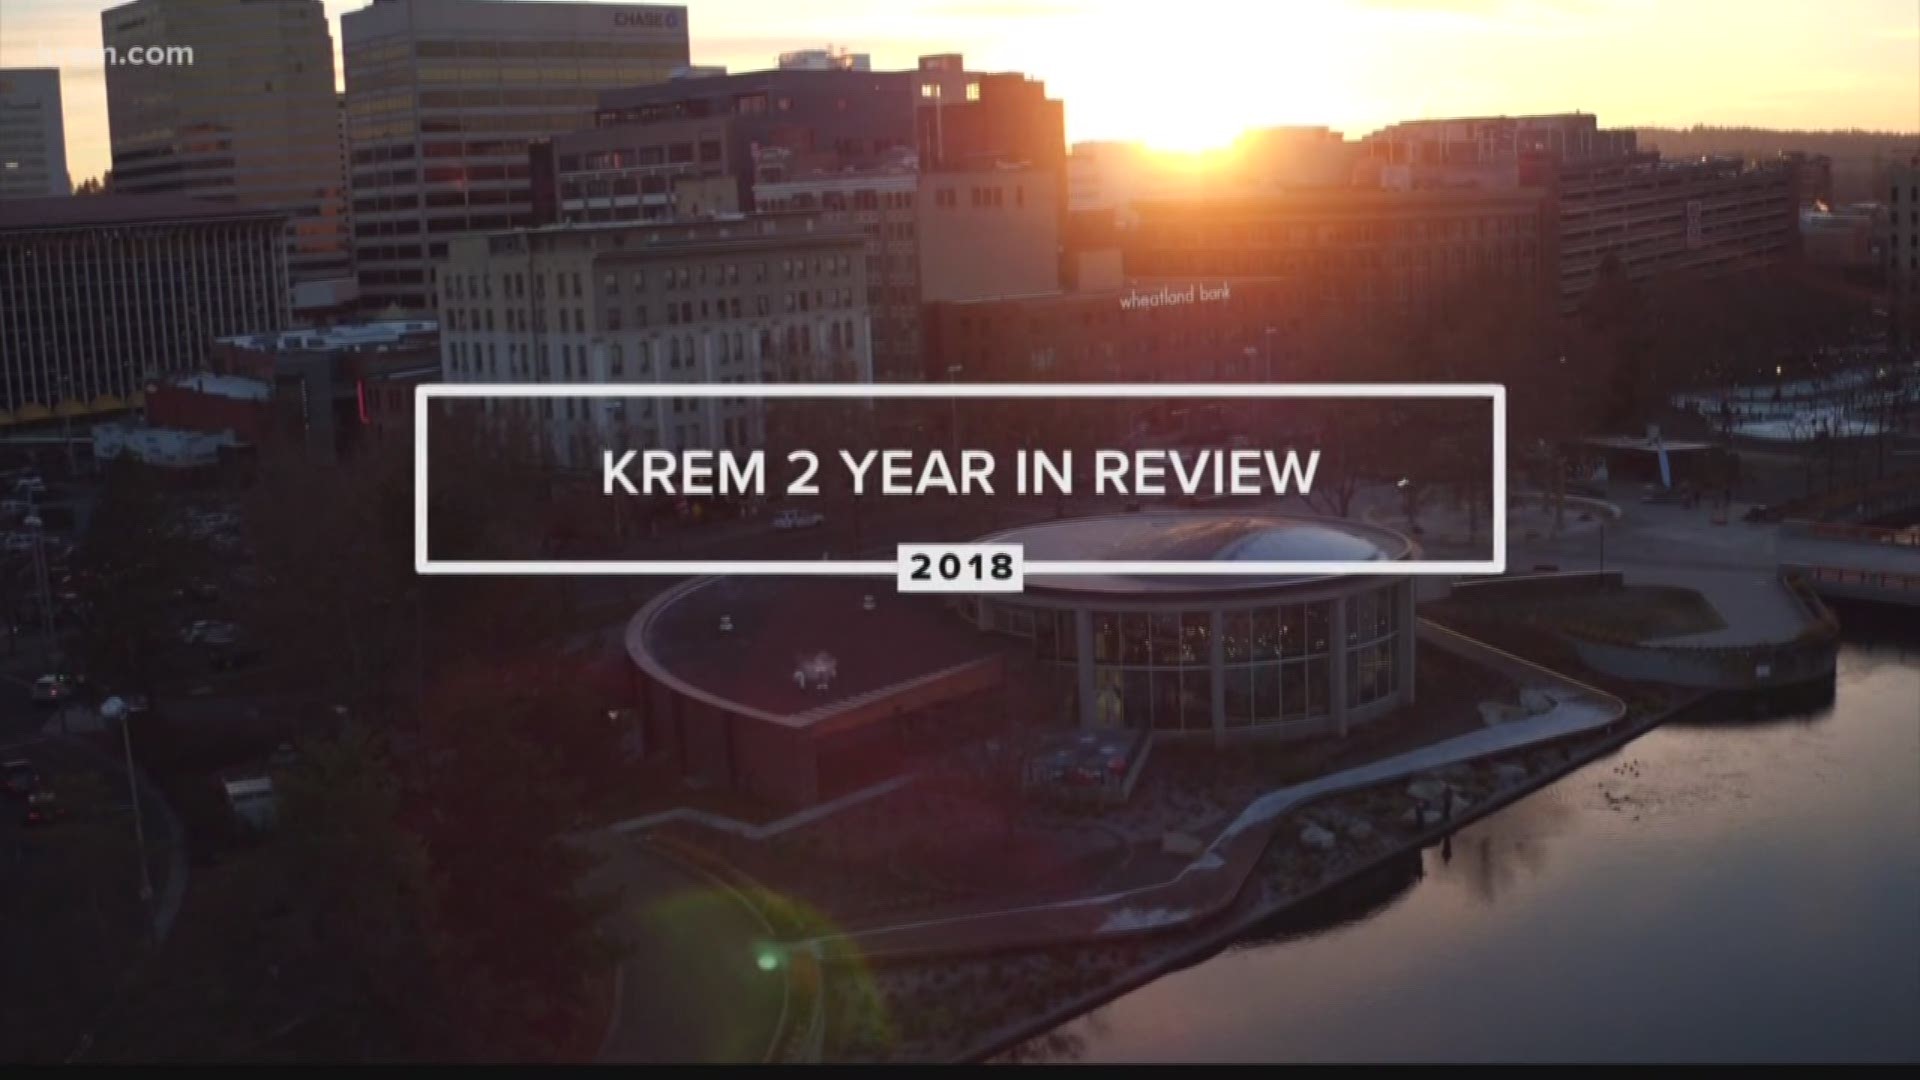 Tom Sherry, Jane McCarthy and Mark Hanrahan reflect back on 2018's top stories for KREM 2's Year in Review